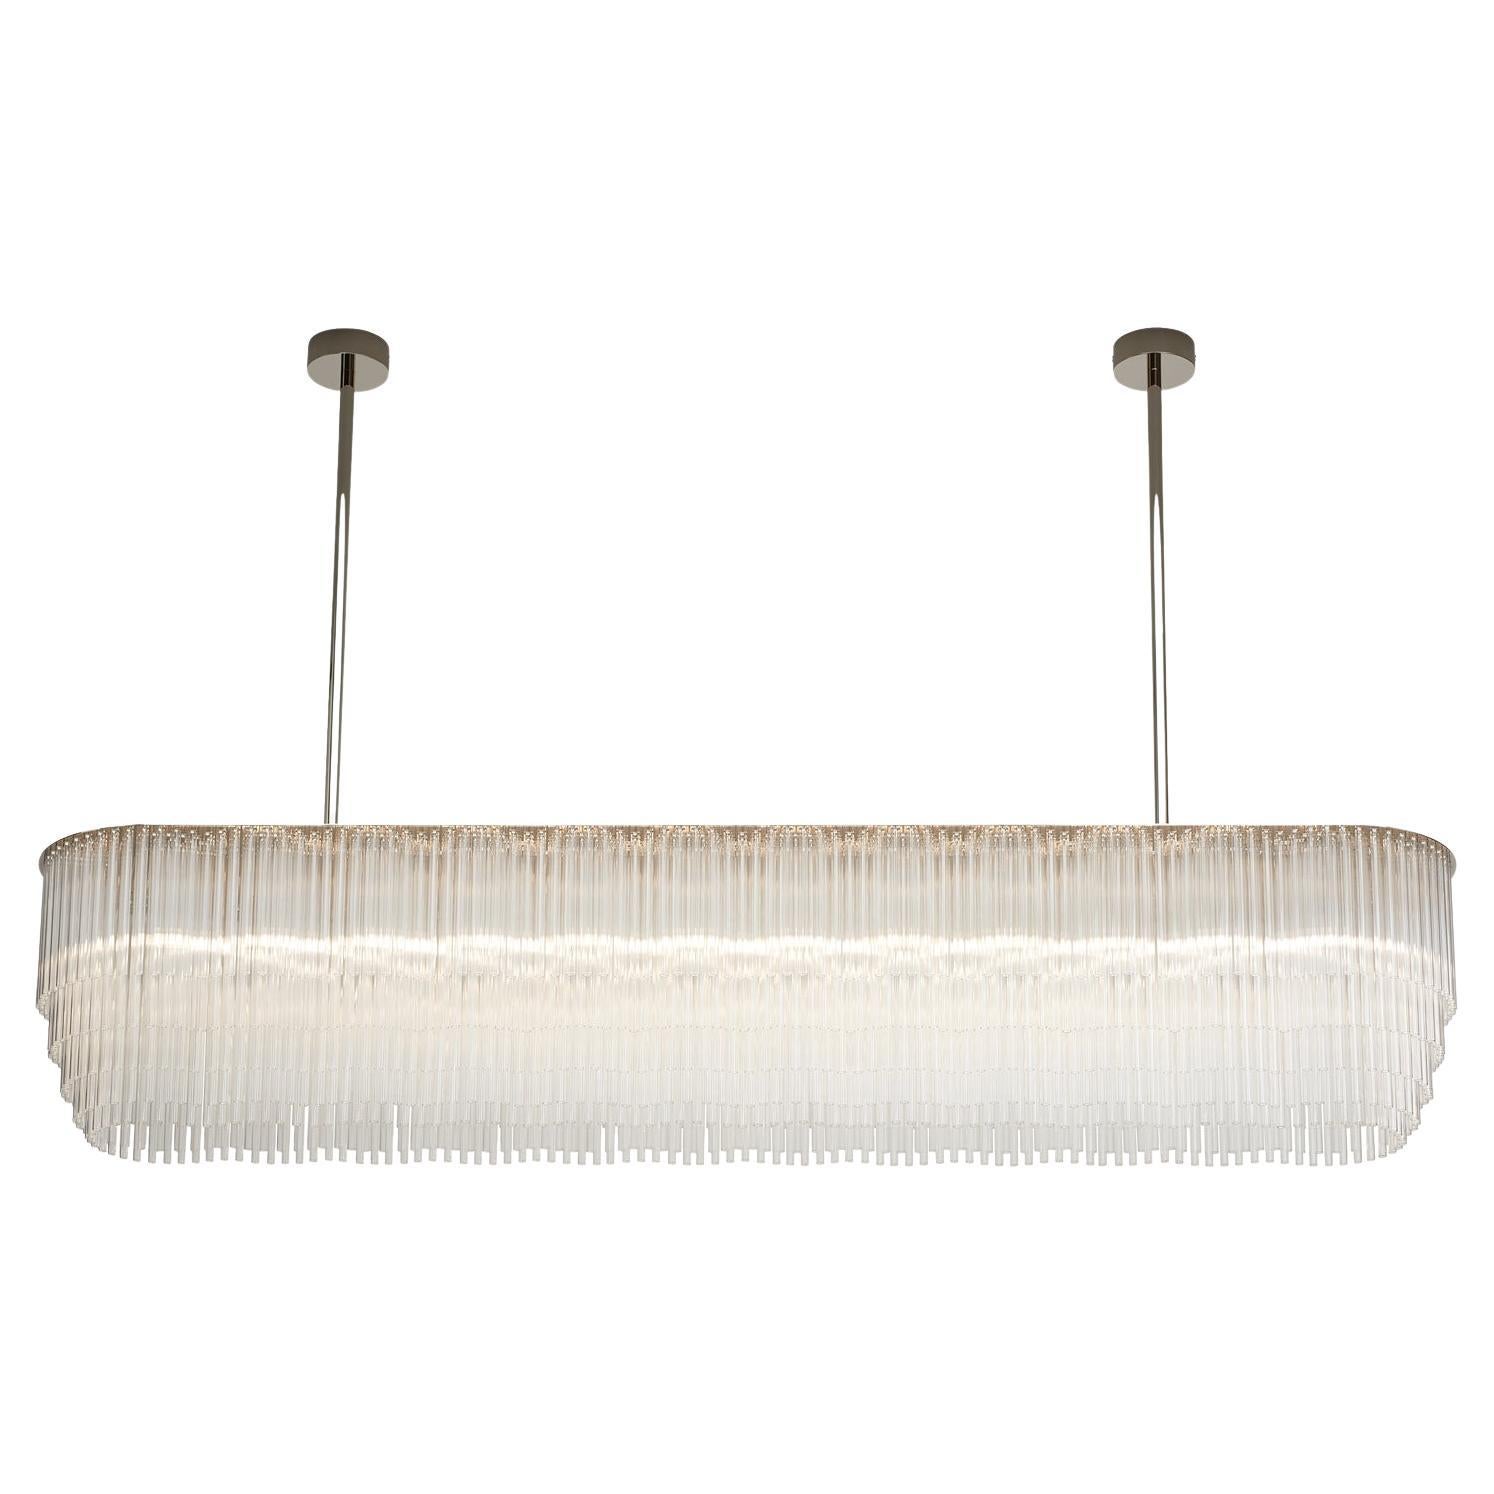 Linear Chandelier 1588mm / 62.5" in Polished Chrome with Tiered Glass Profile